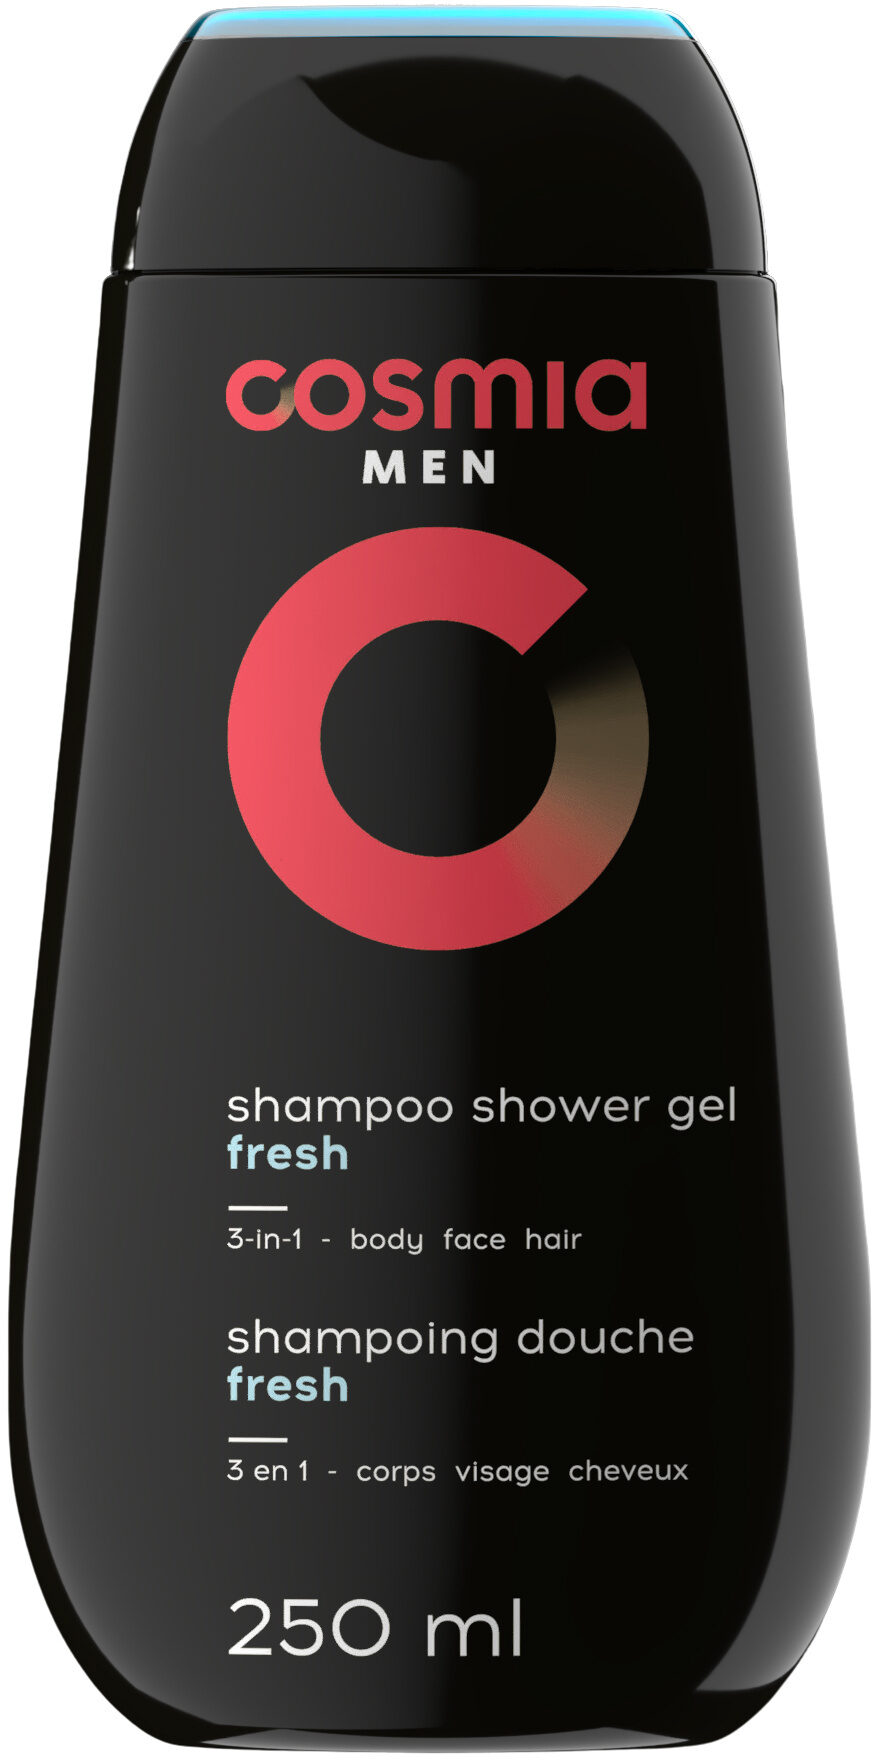 Shampoing douche fresh 3 in 1 - Product - fr